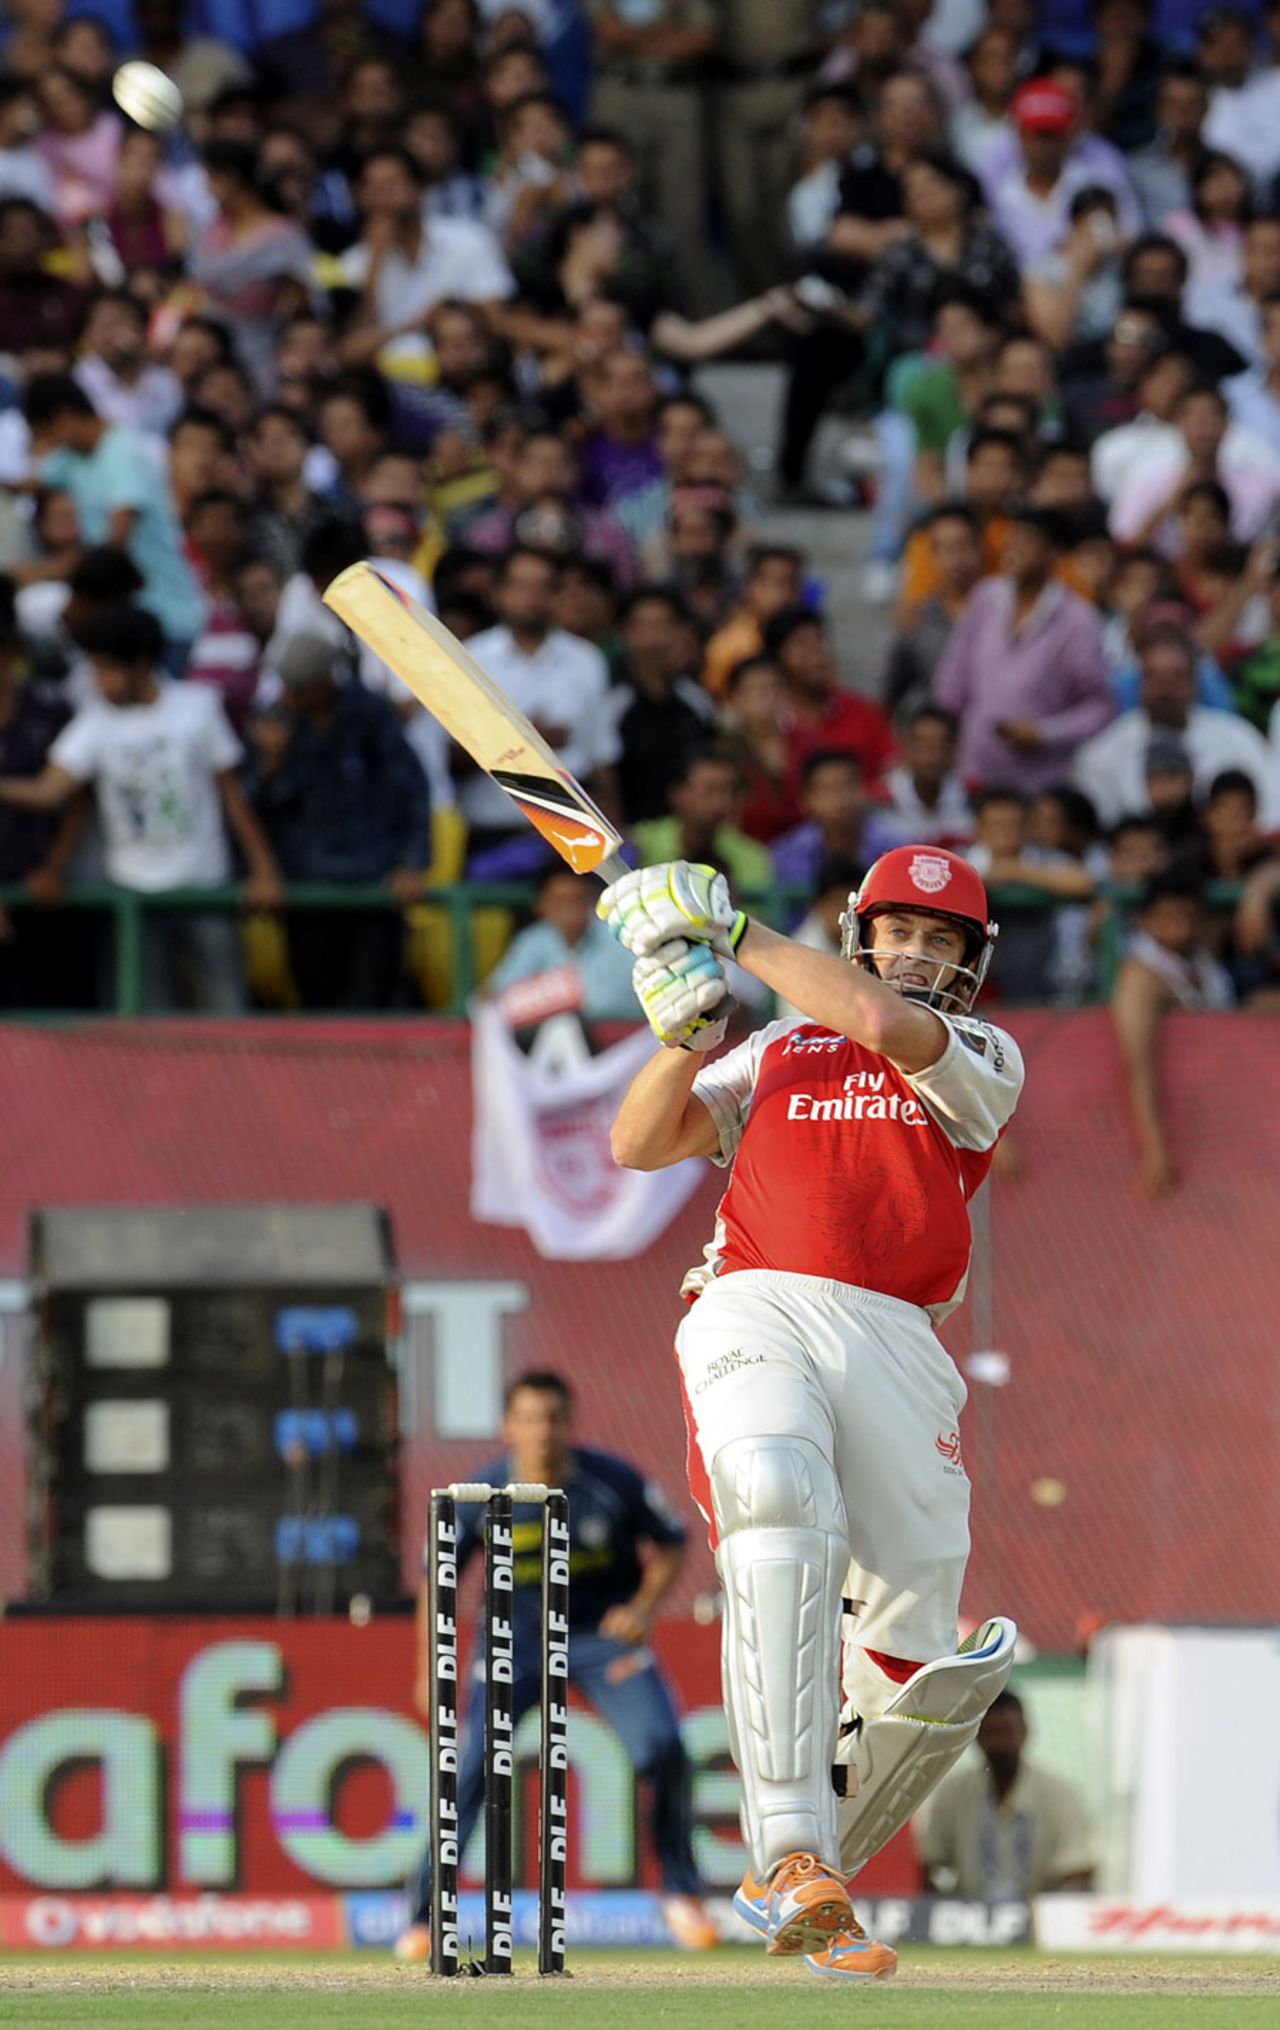 Adam Gilchrist plays on the up on his way to a 36-ball fifty, Kings XI Punjab v Deccan Chargers, IPL 2011, Dharamsala, May 21, 2011